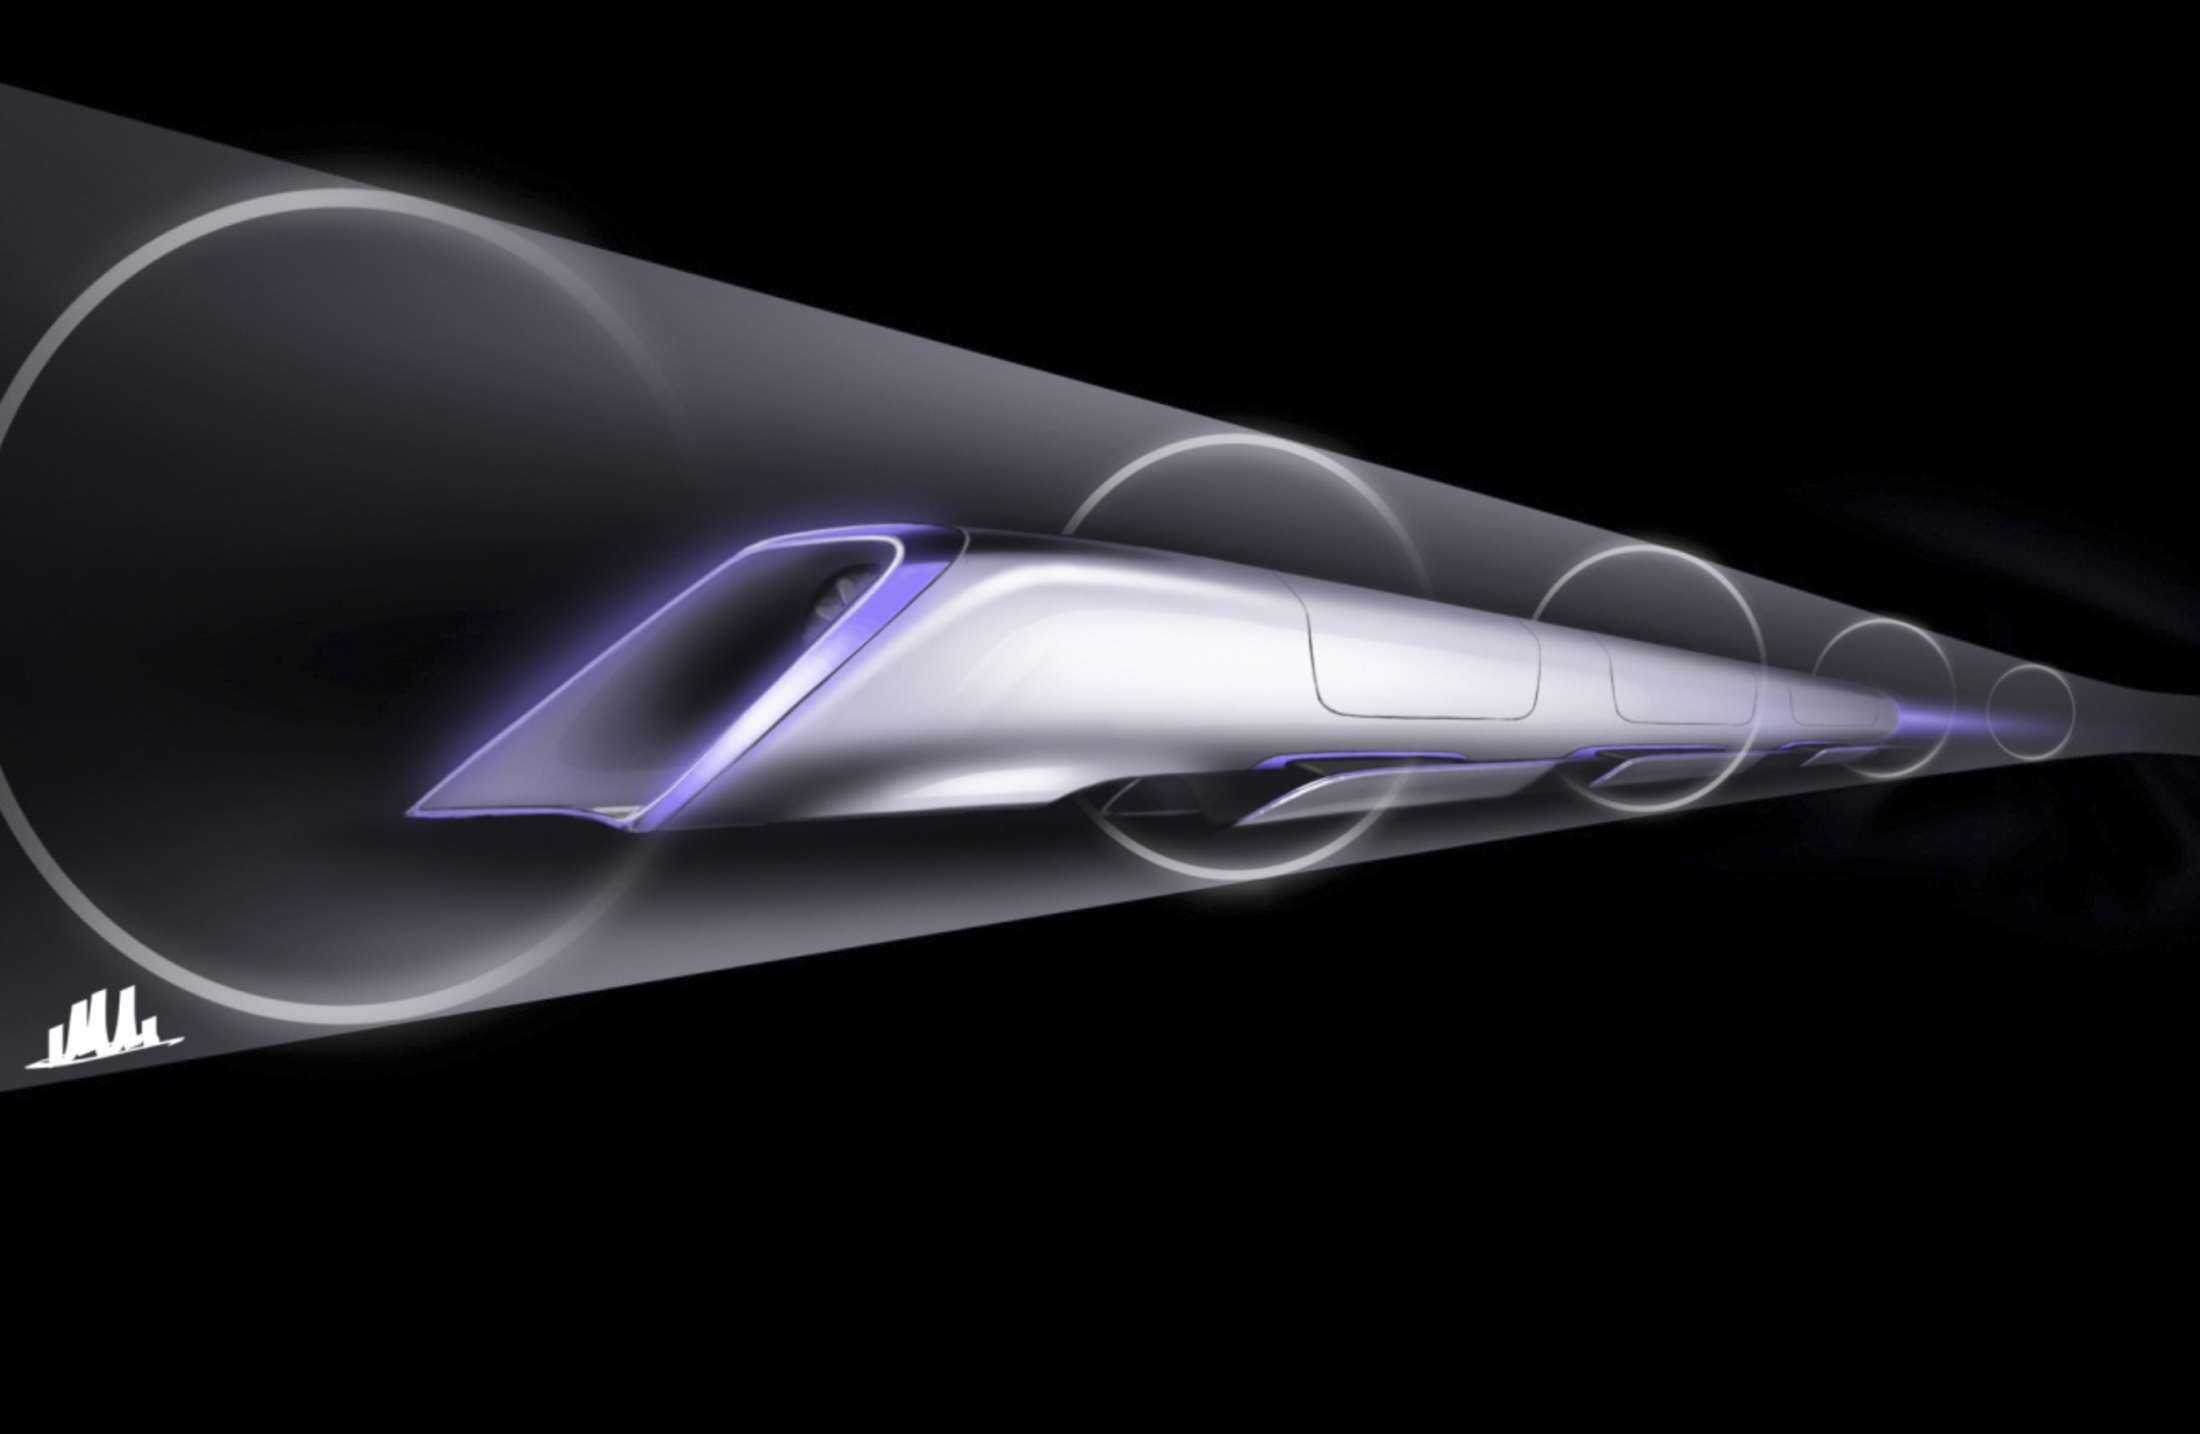 Sketch of proposed "Hyperloop" transport system proposed by billionaire Elon Musk